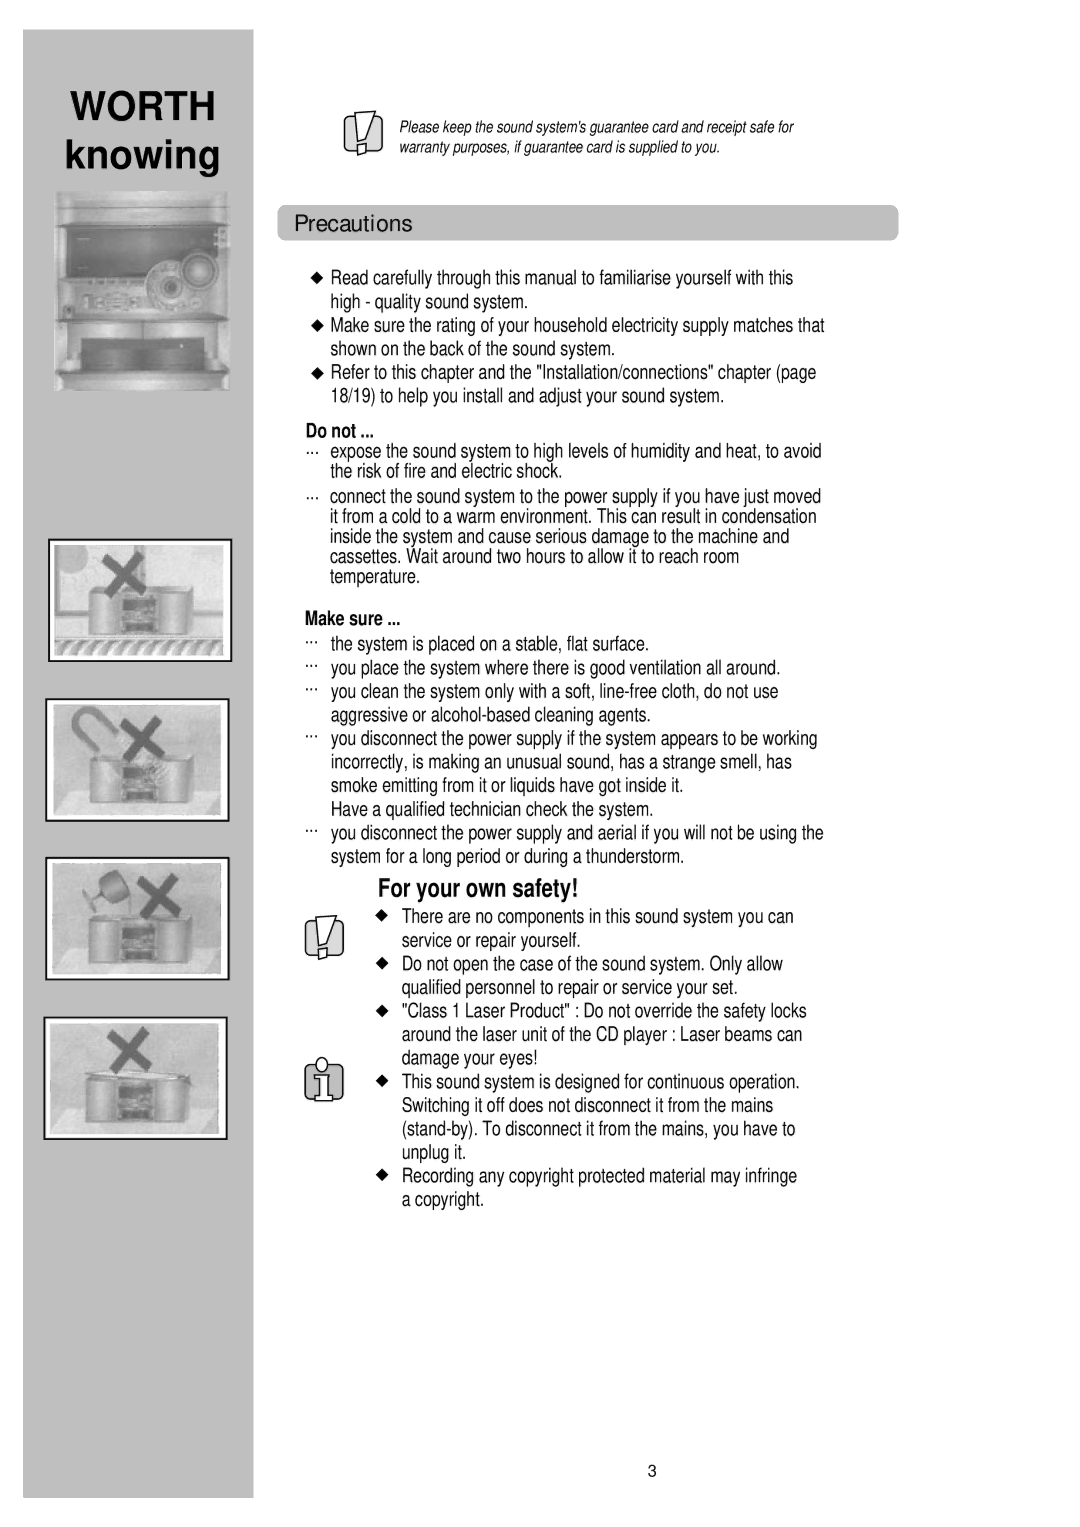 Palsonic PSML-826 instruction manual Precautions, For your own safety, Have a qualified technician check the system 